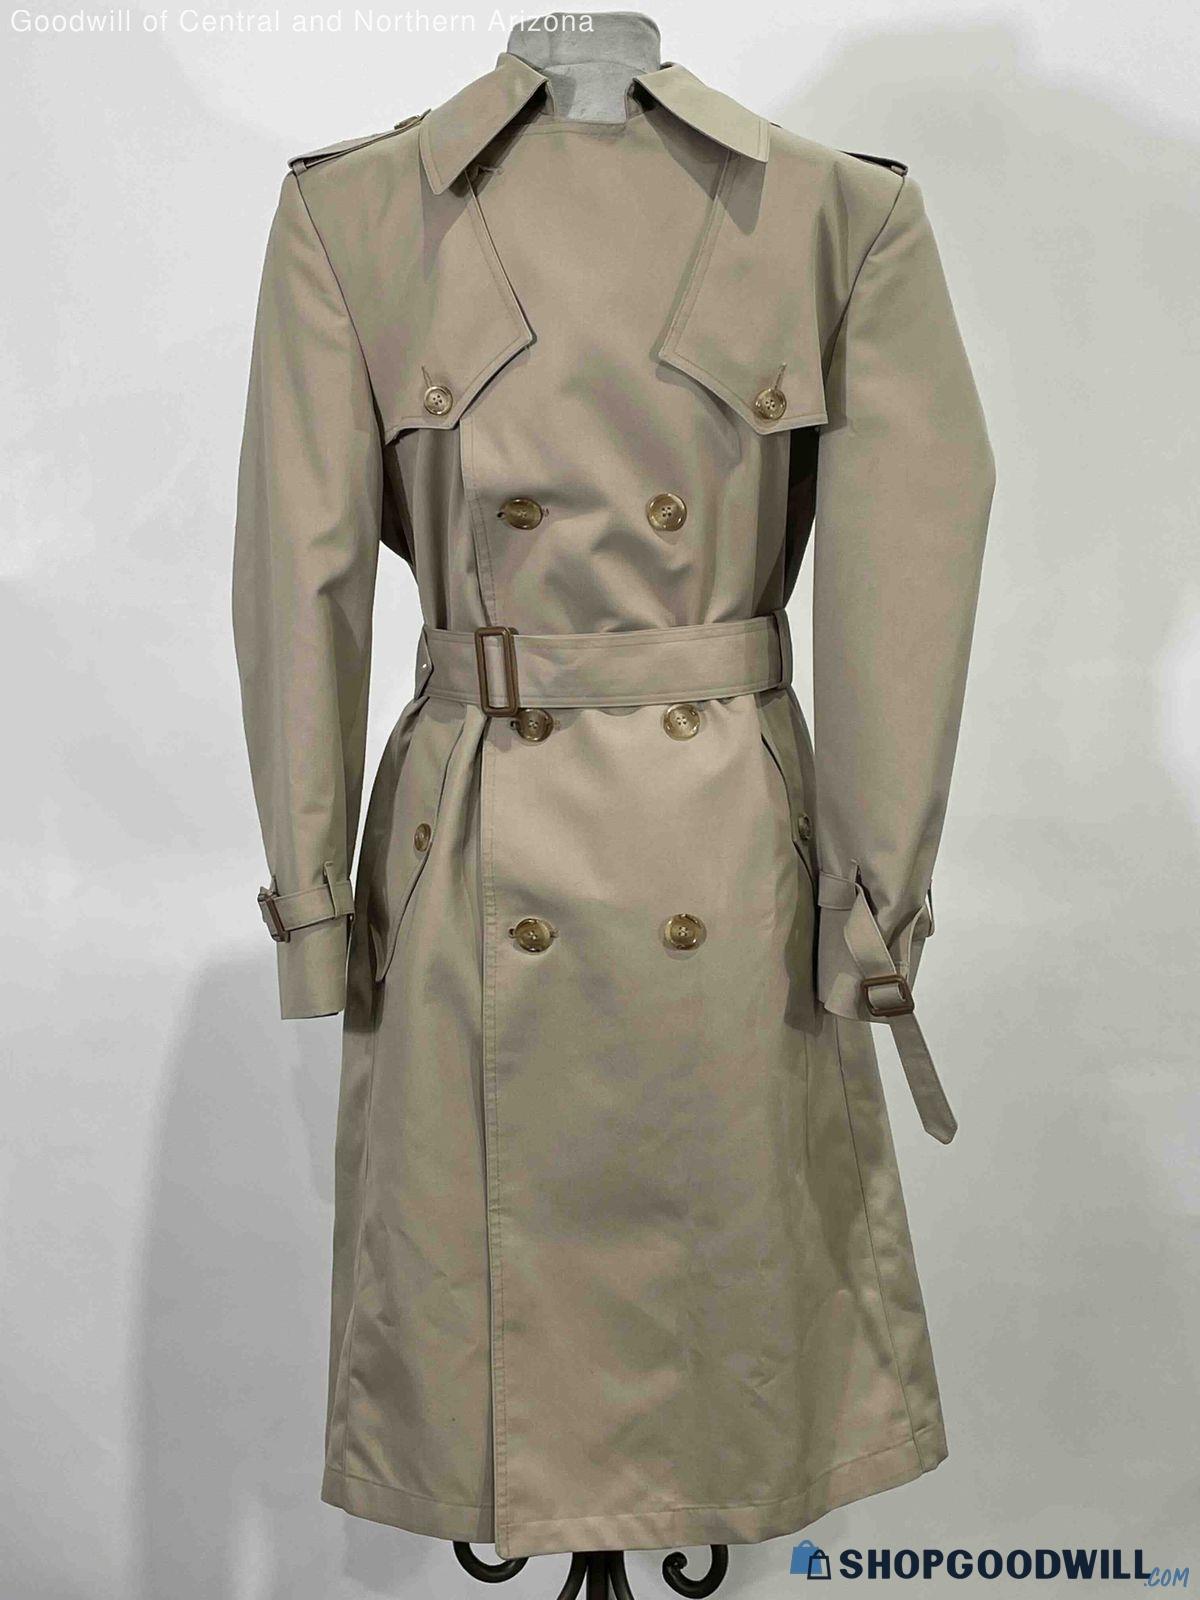 Christian Dior Monsieur Trench Coat Size 40s - shopgoodwill.com